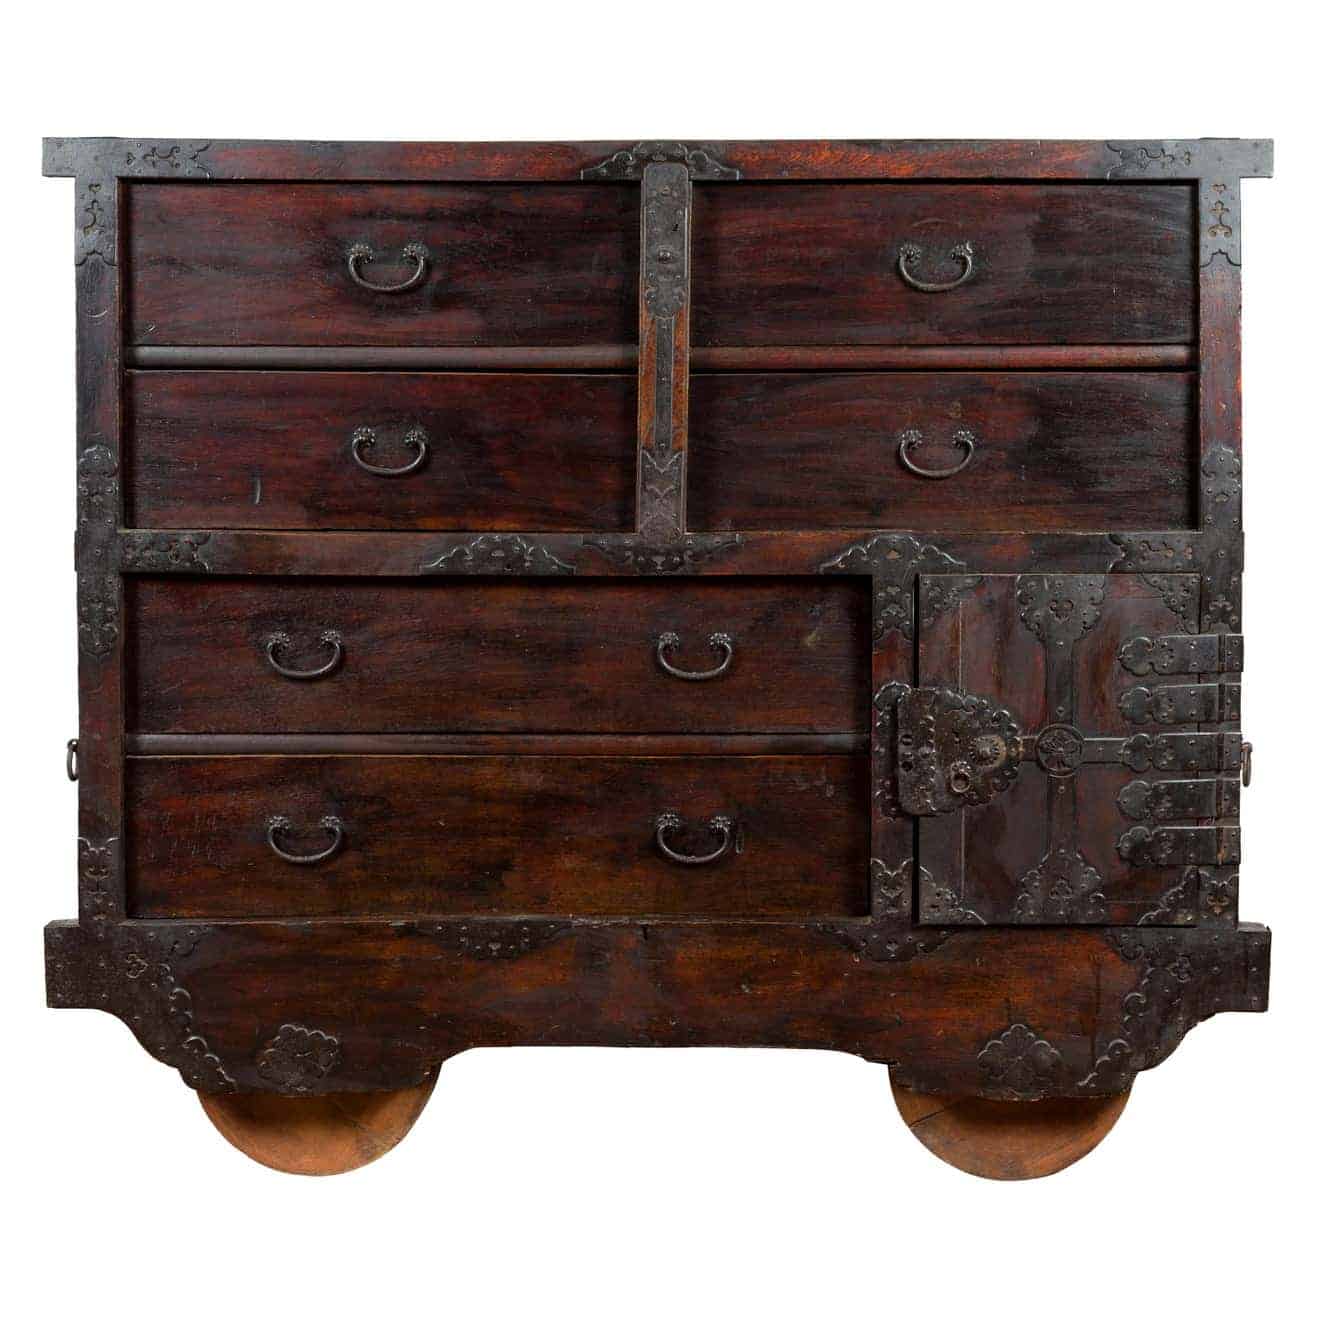 Japanese chest with safe on wheels from the Meiji period